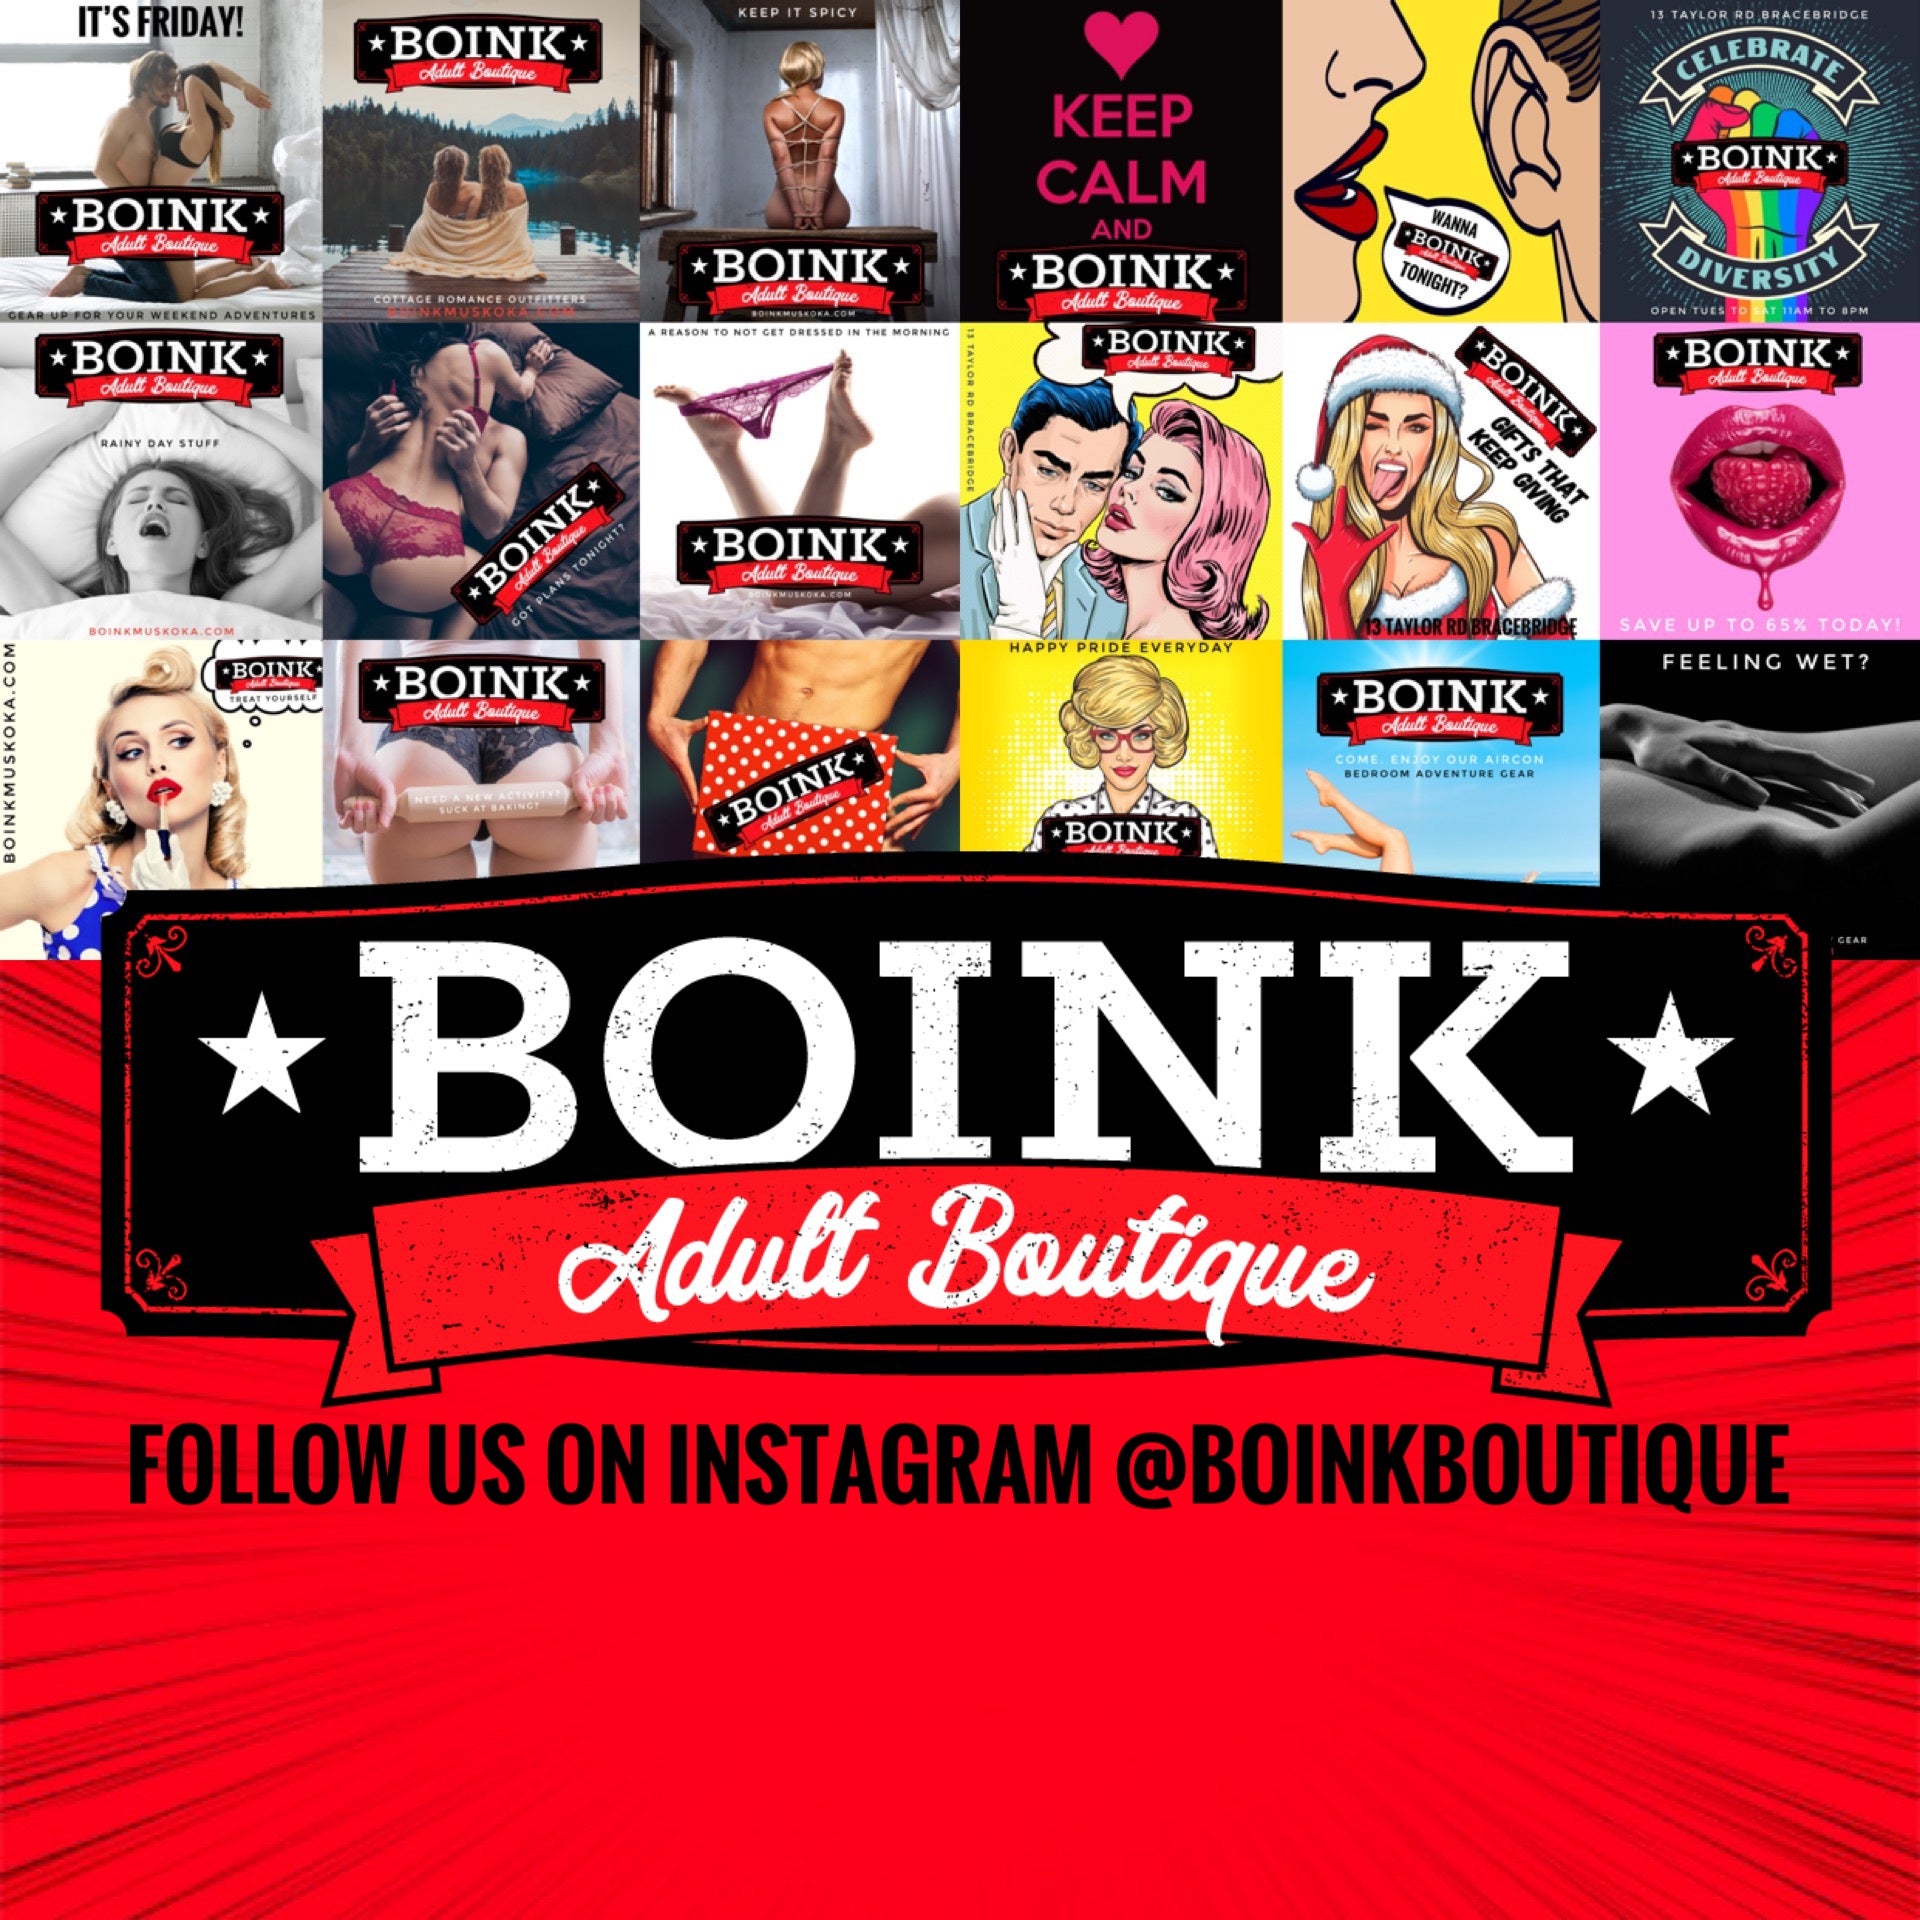 Boink Adult Boutique follow us @boinkboutique free shipping on orders over $69+ in Canada Sex Toys couple toys c-rings vibrators lubricants oral sex enhancers penis pumps lingerie novelties adult games 